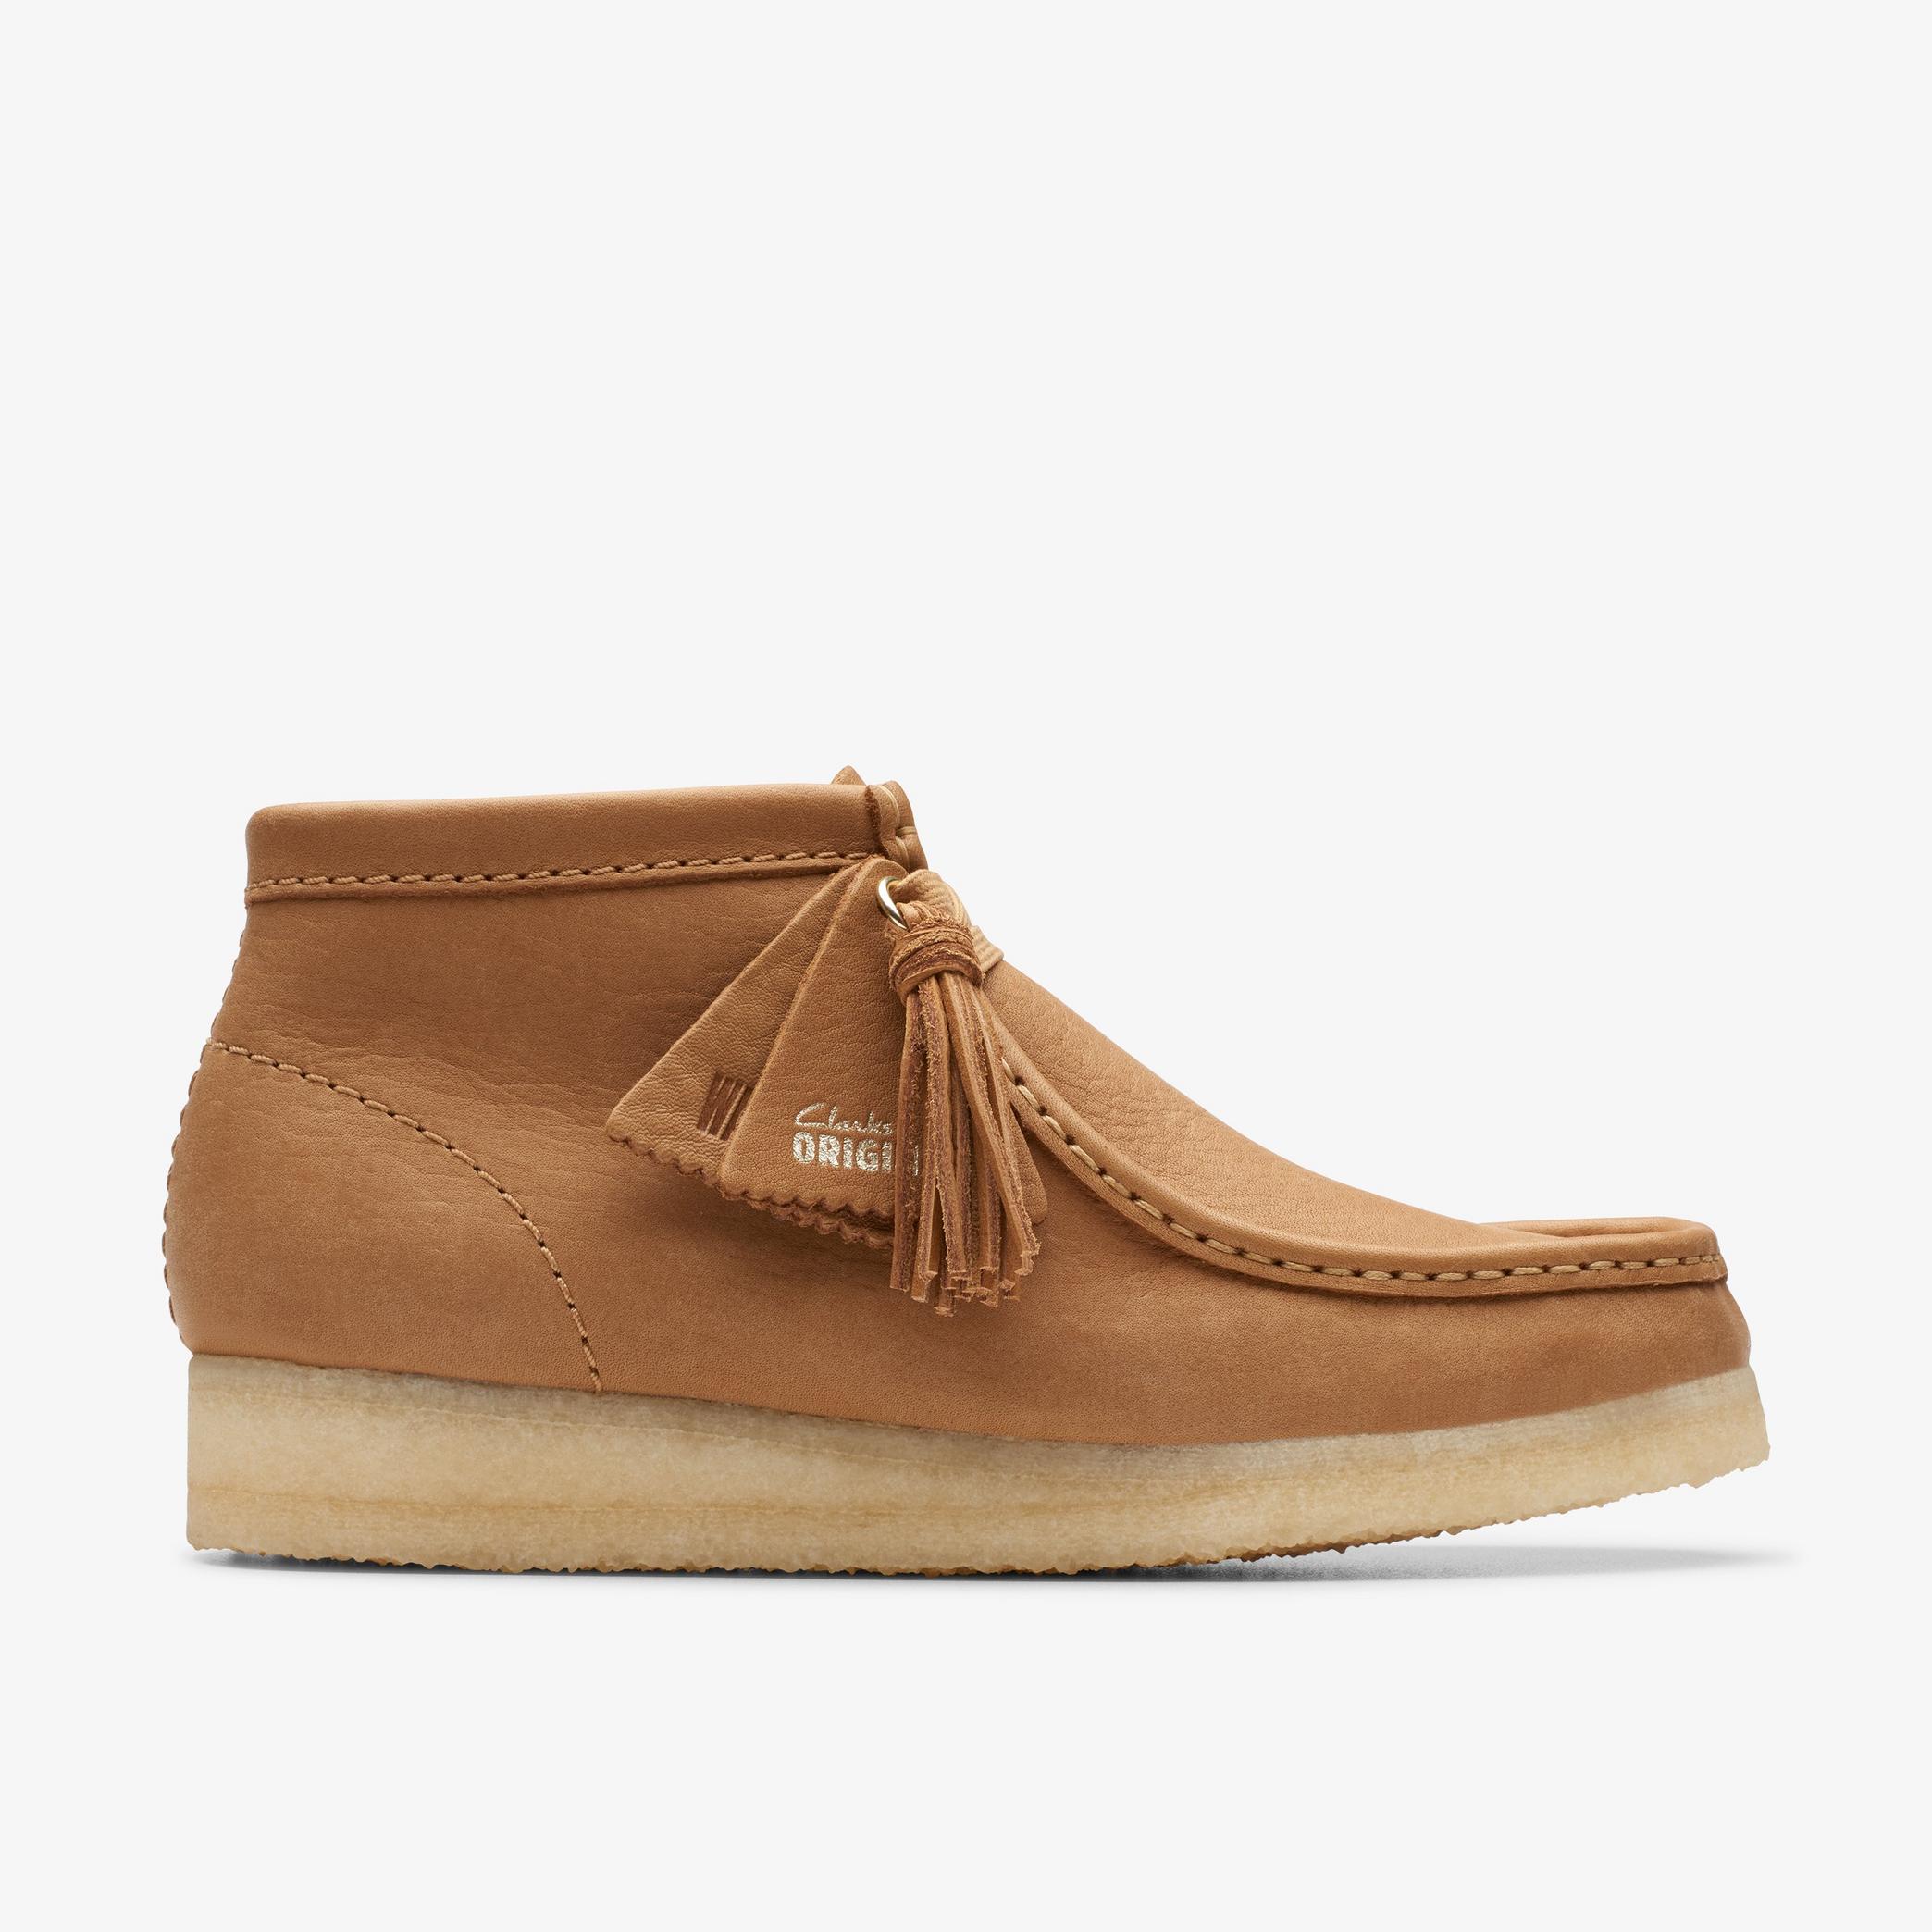 Wallabee Boot Mid Tan Leather Wallabee, view 1 of 7